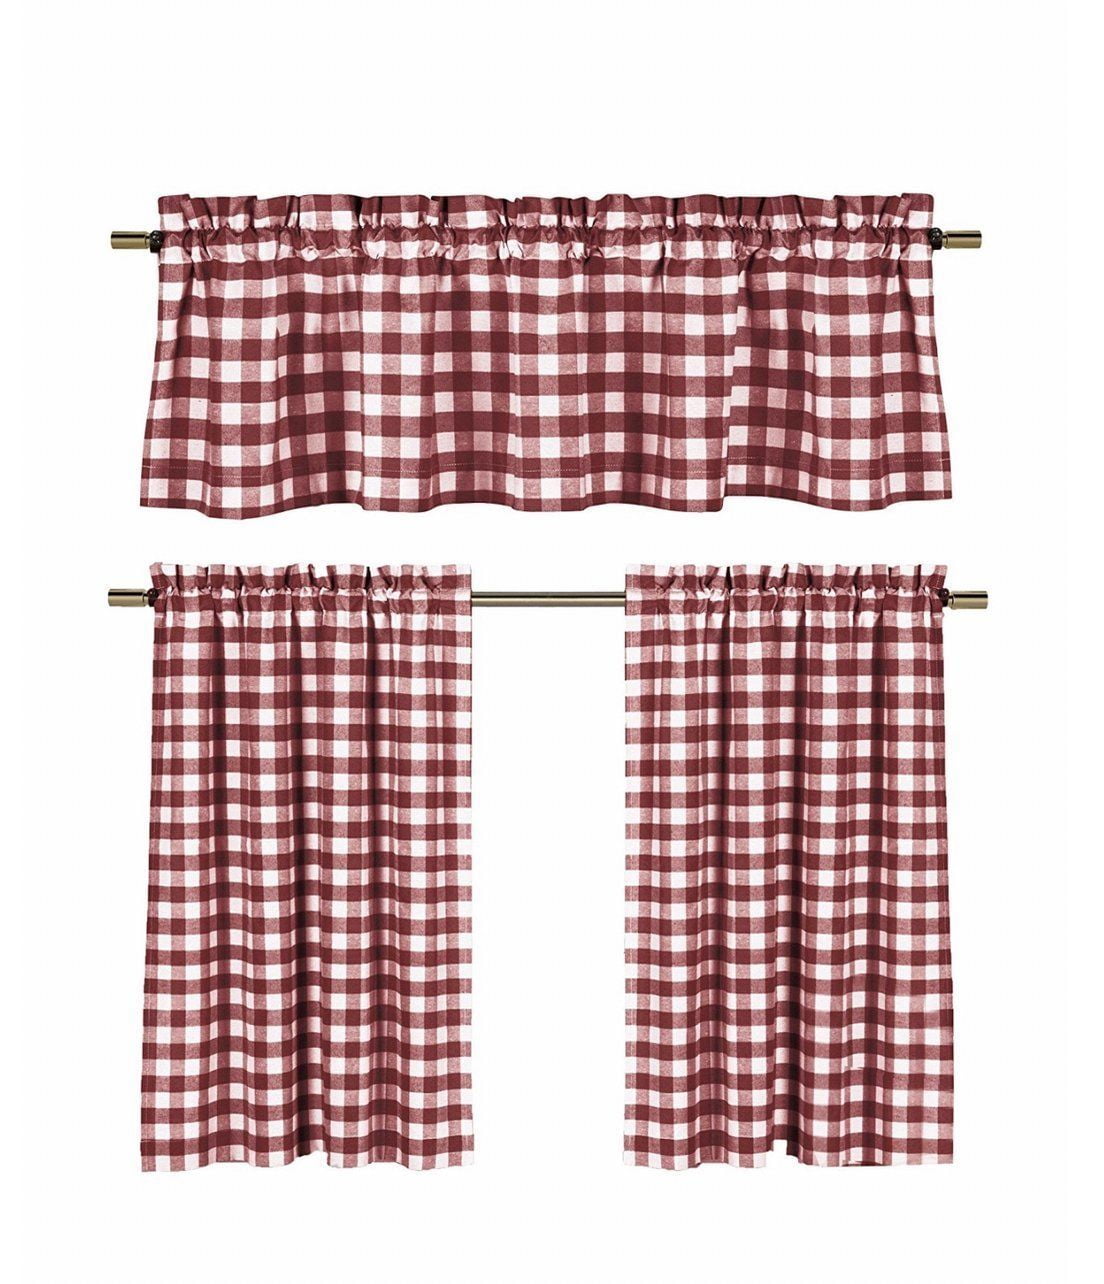 Wine Red & White Country Checkered Plaid Kitchen Tier Curtain Valance Set 